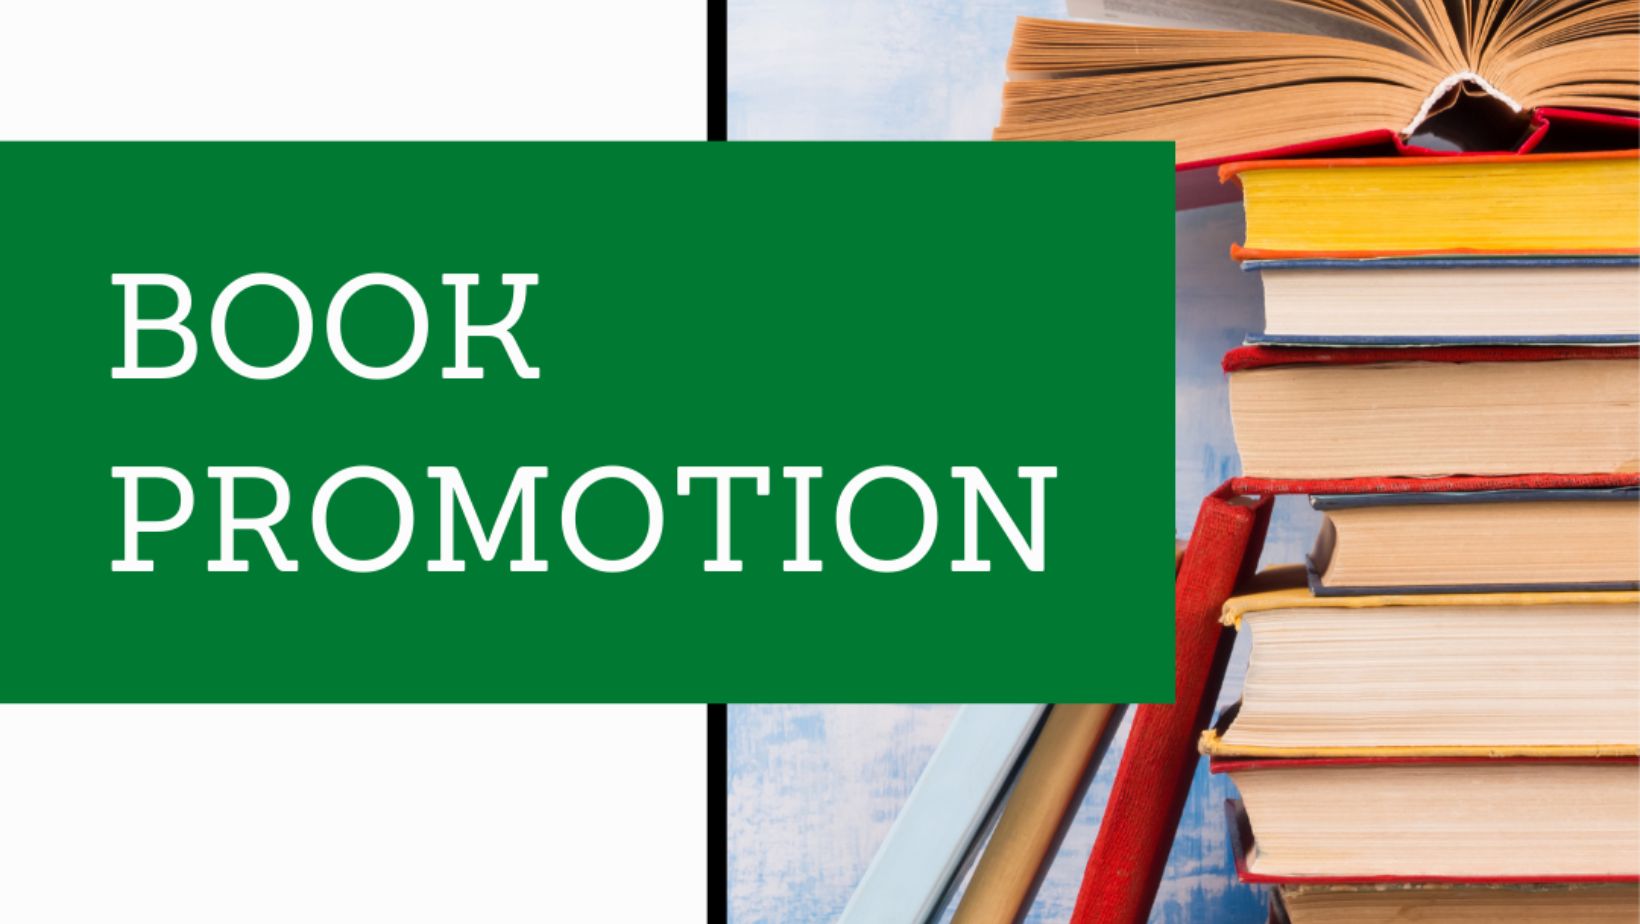 Book Promotion Services